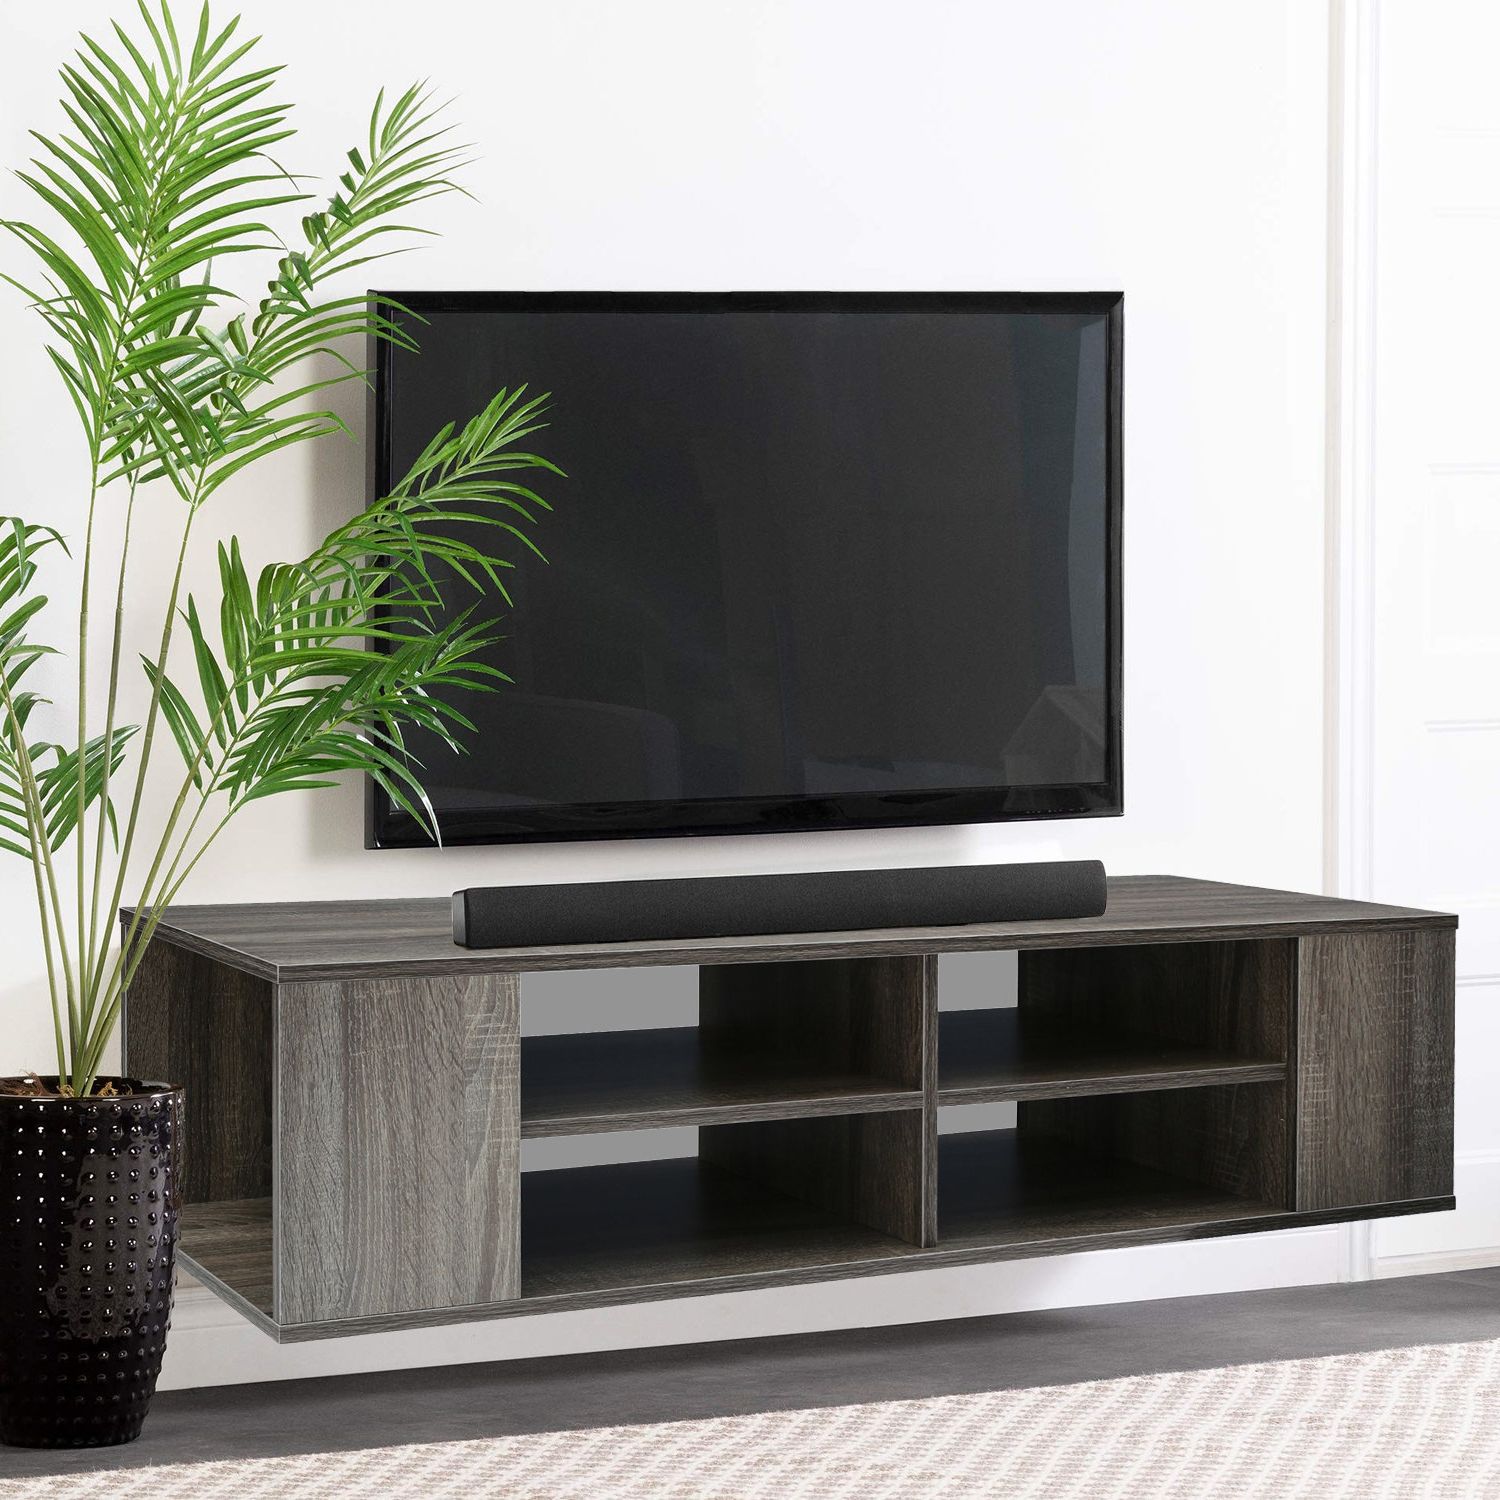 Ebern Designs Lequentin Wood Wall Mounted Media Console, Floating Tv Stand  Component Shelf, Tv Cabinet For Tvs Up To 50" & Reviews | Wayfair Within Modern Stands With Shelves (View 12 of 20)